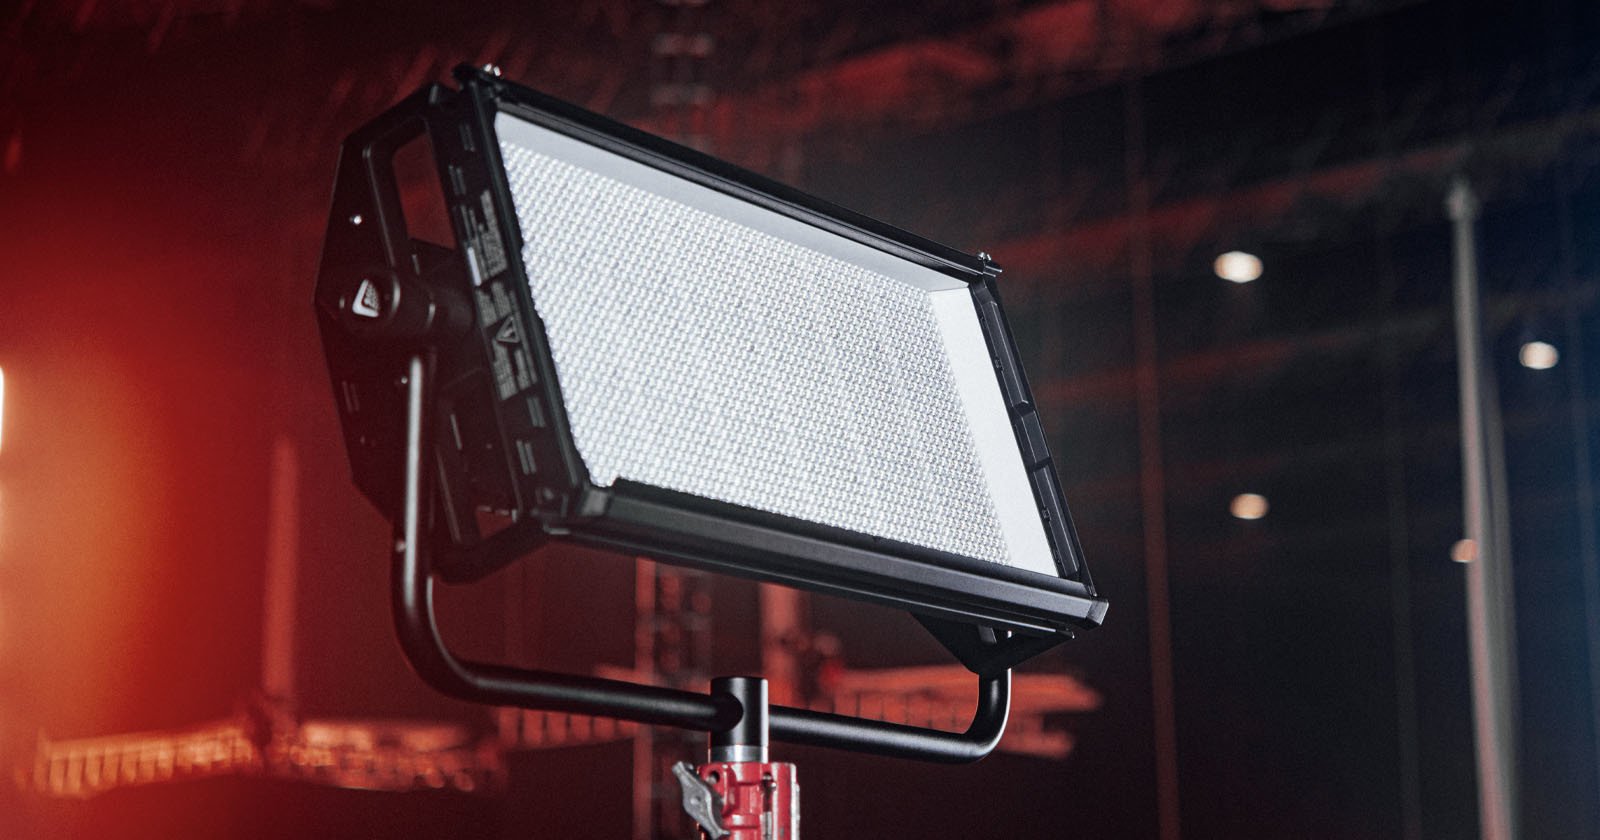 Litepanels New LED is Super-Bright Yet Light Enough to Mount on a Drone